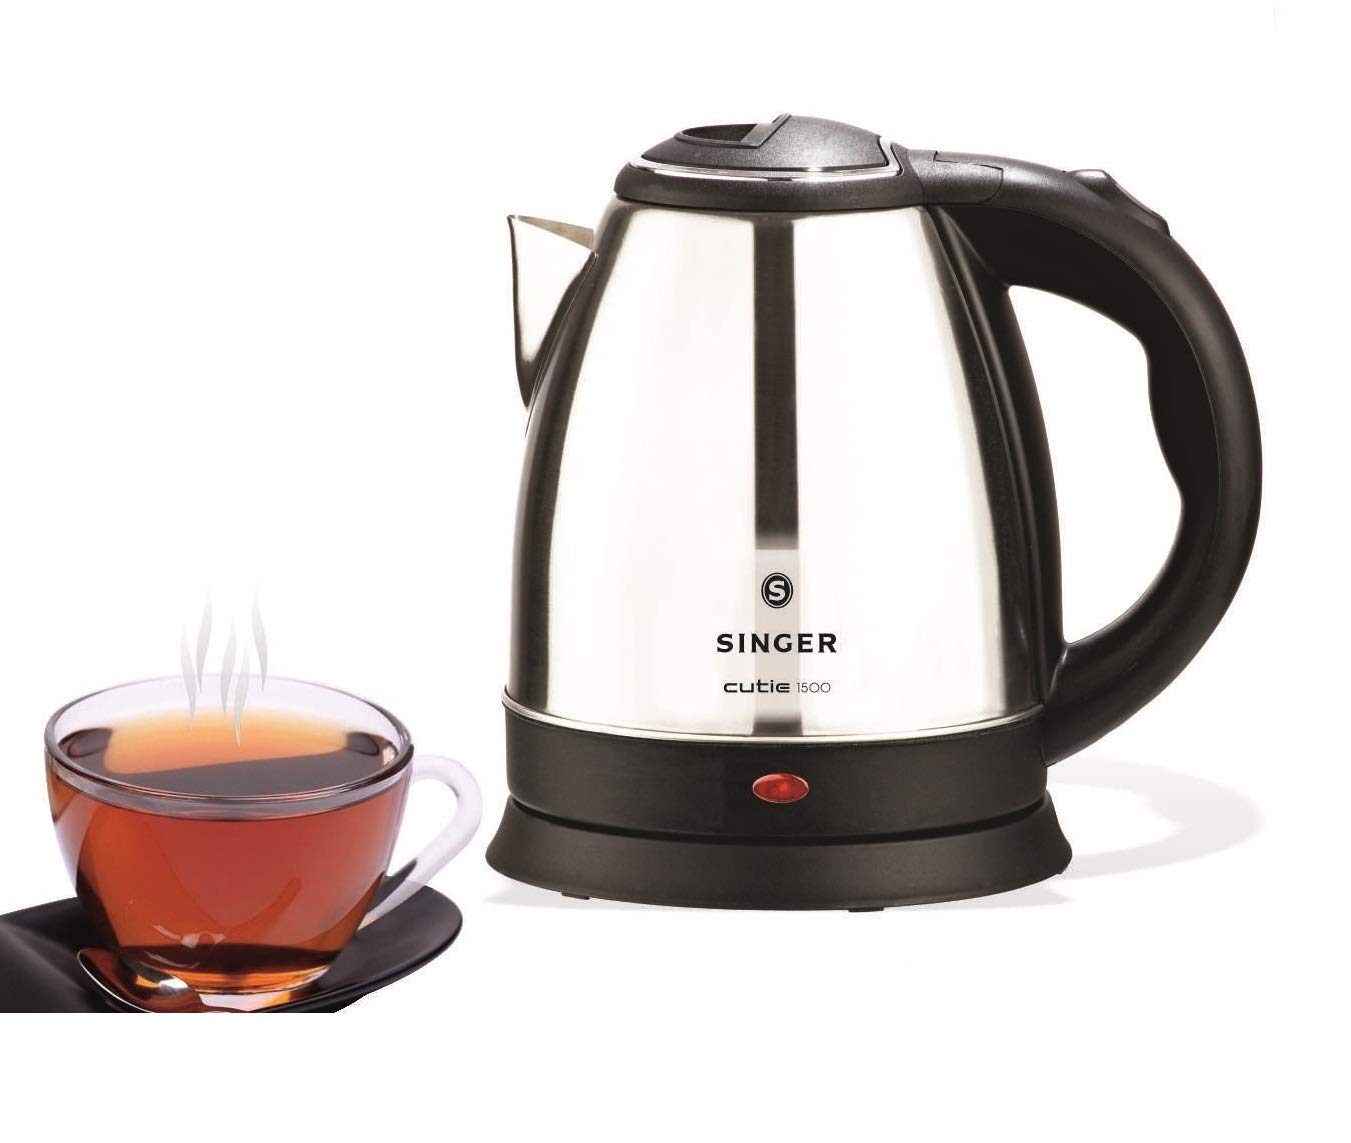 Singer E FIT 1700 Electric Kettle 1.7 Liter Stainless Steel, 1500watts - Black, Silver